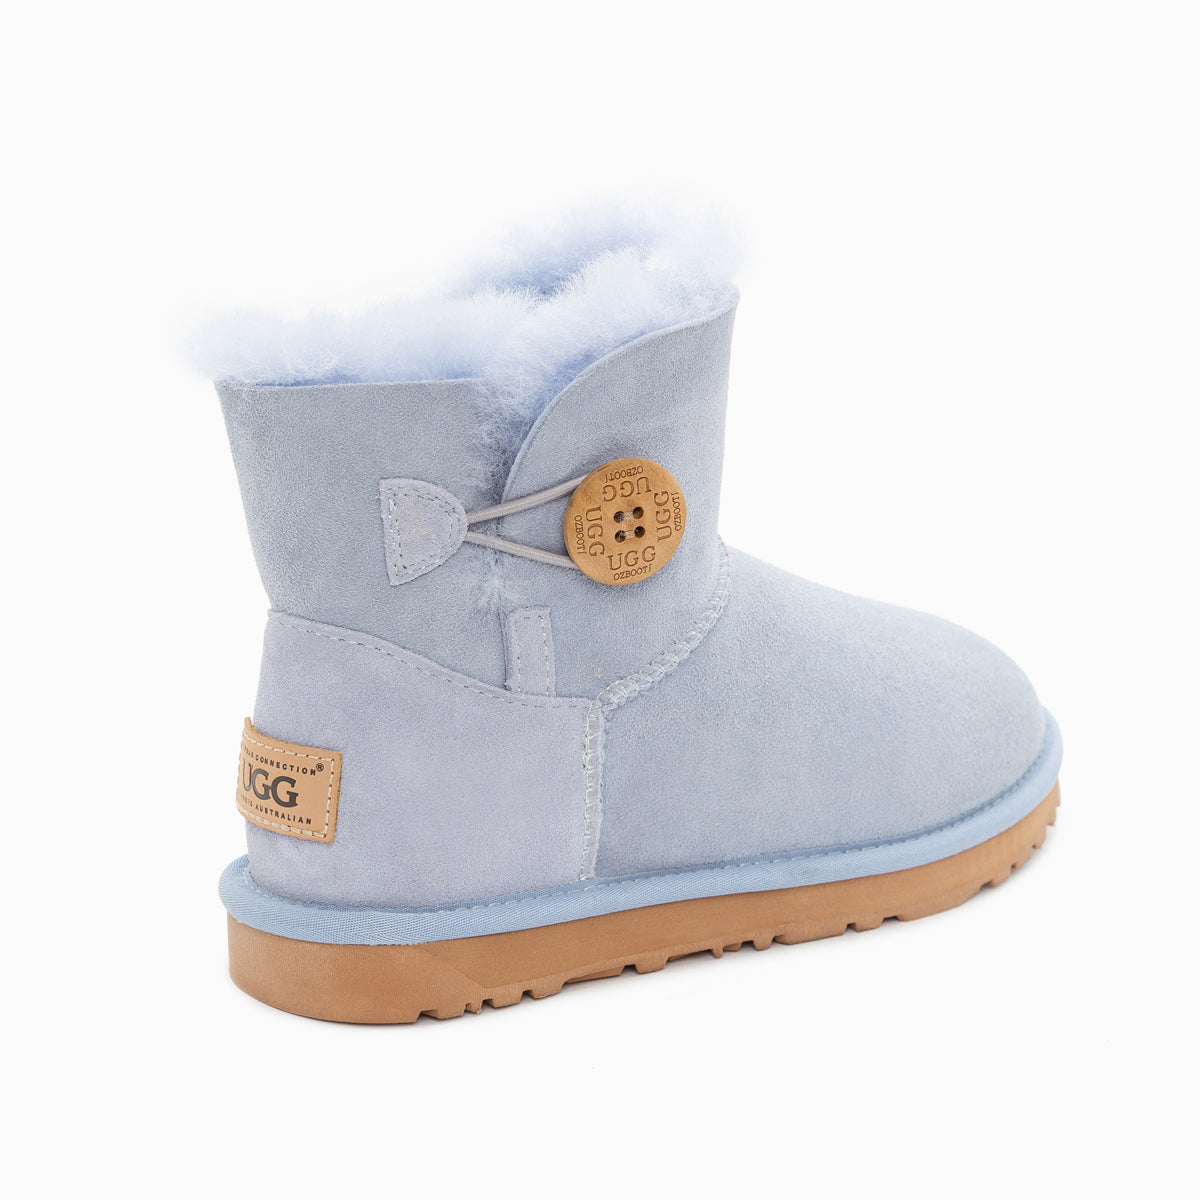 Ugg Classic Mini Button Boots (Water Resistant)-Boots-PEROZ Accessories